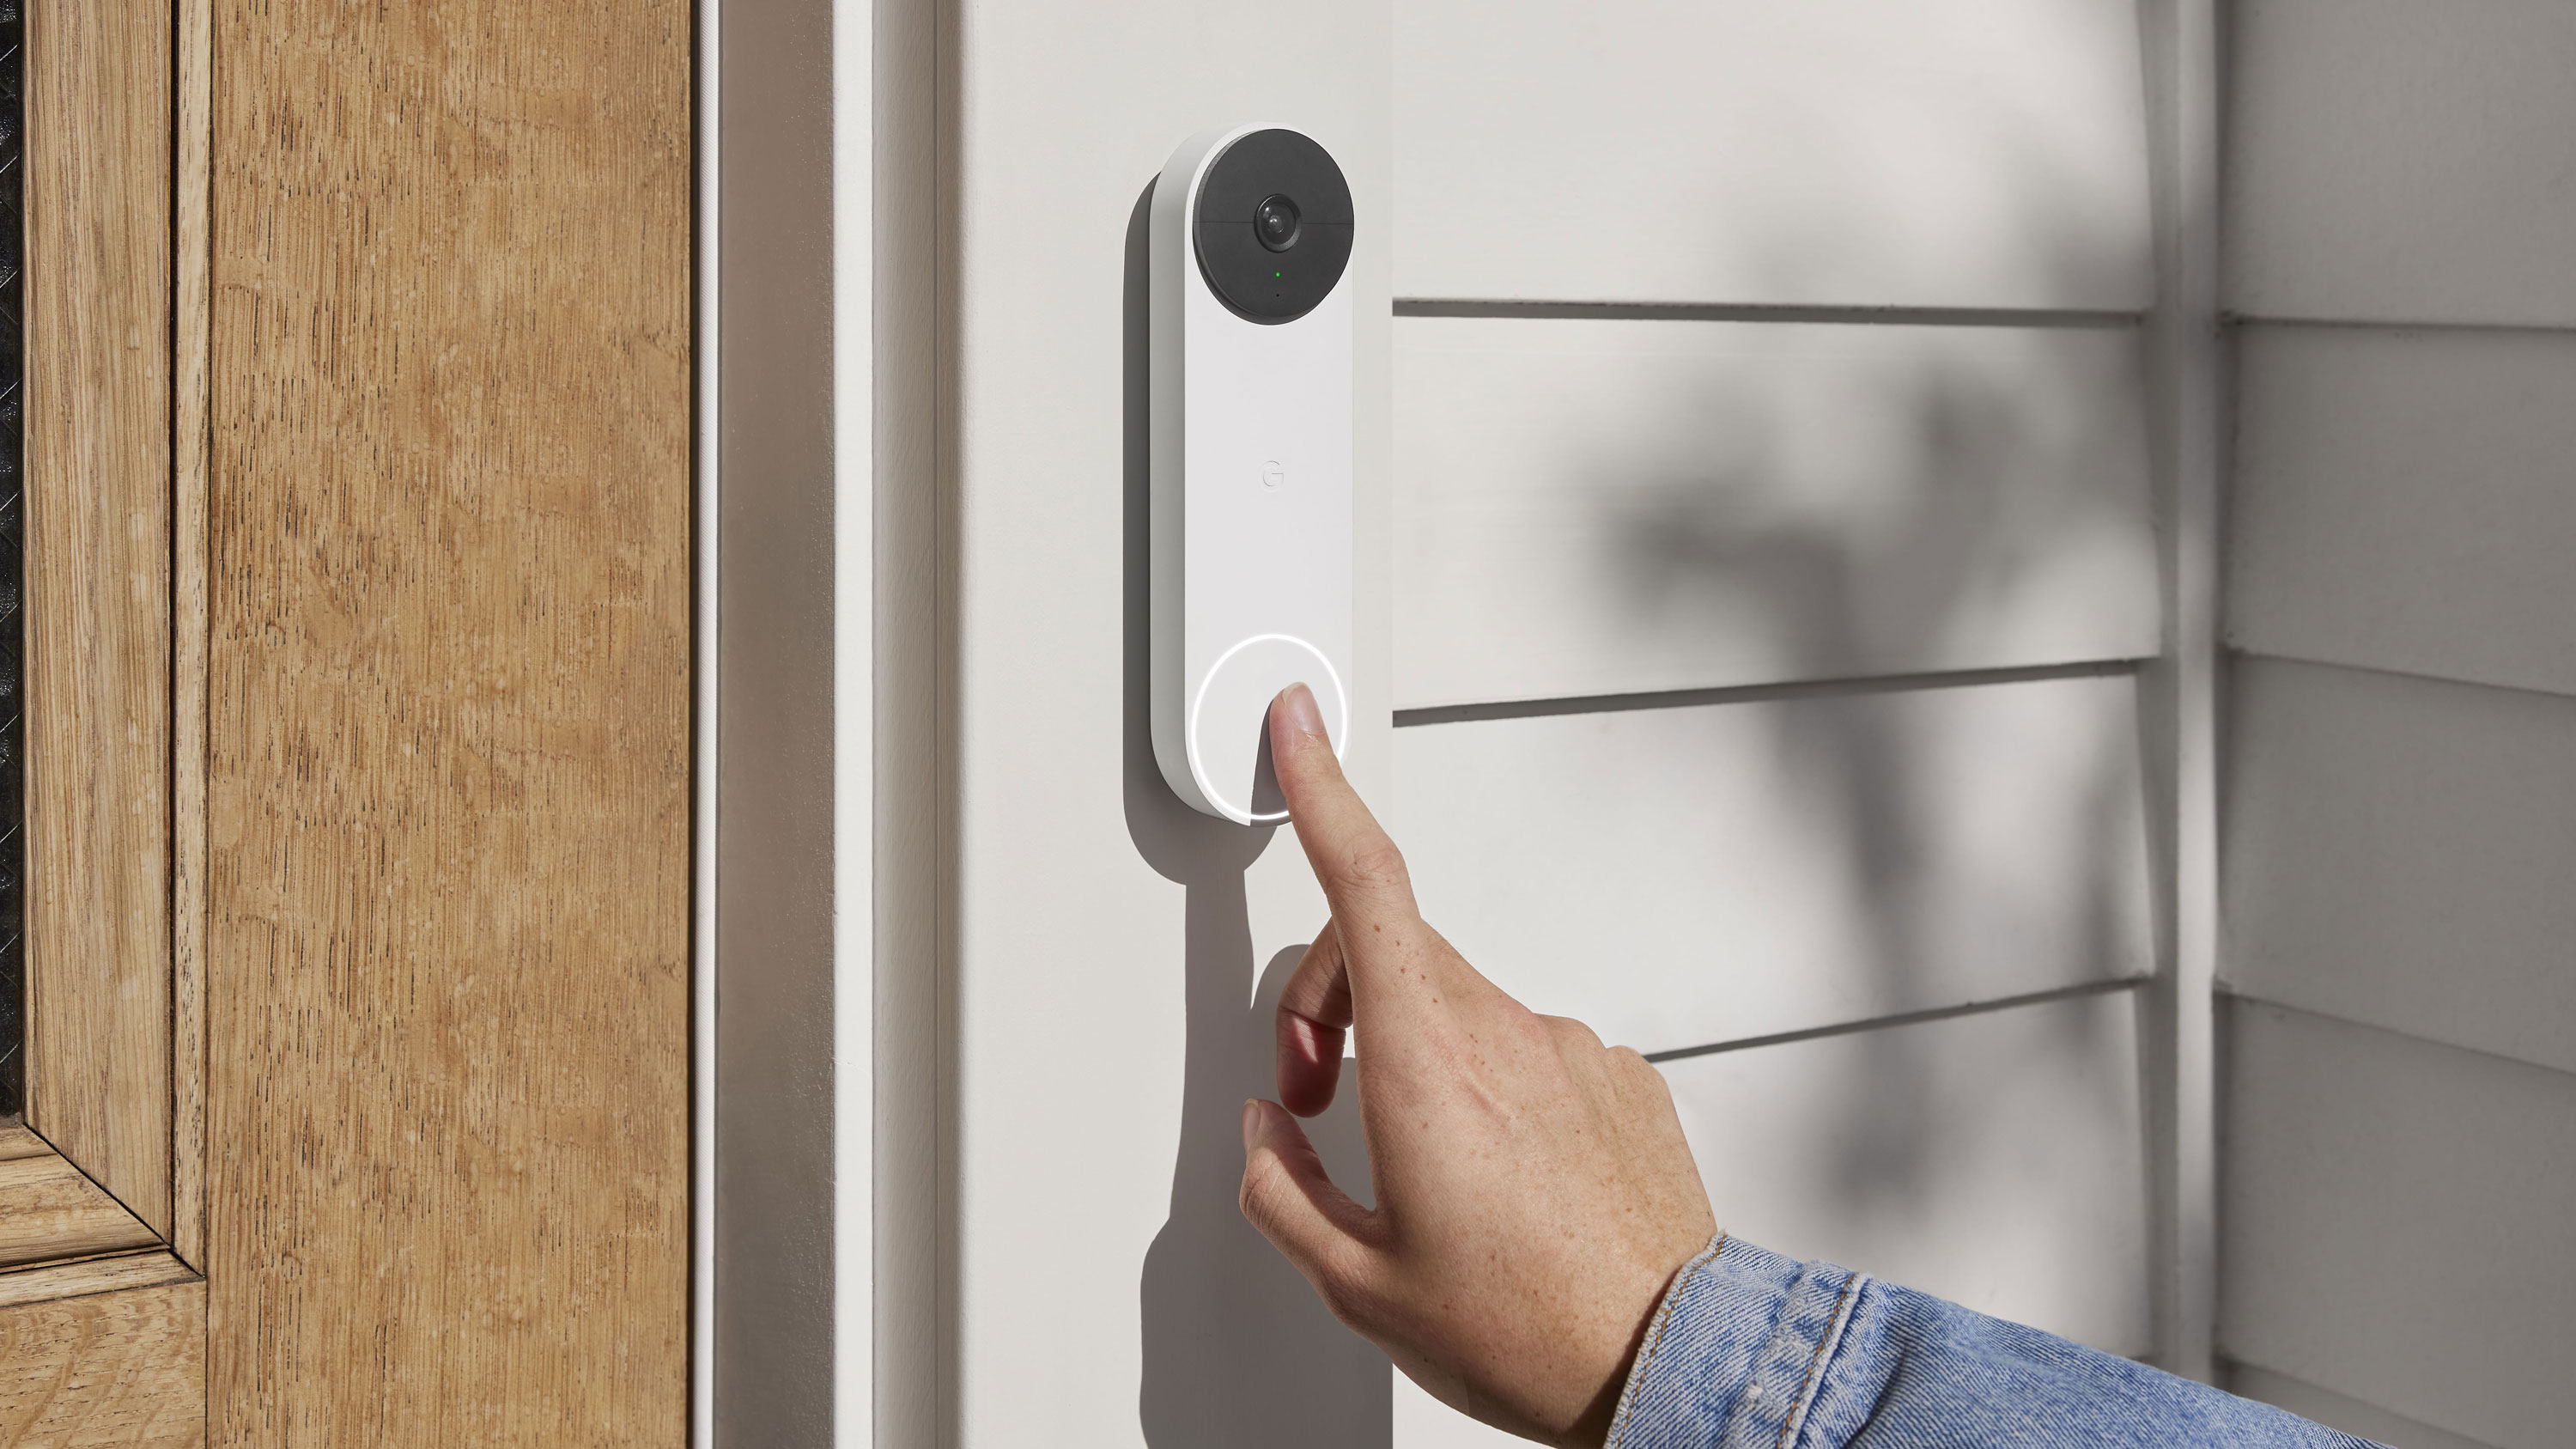 A hand press the button on the Nest Doorbell mounted on a door frame